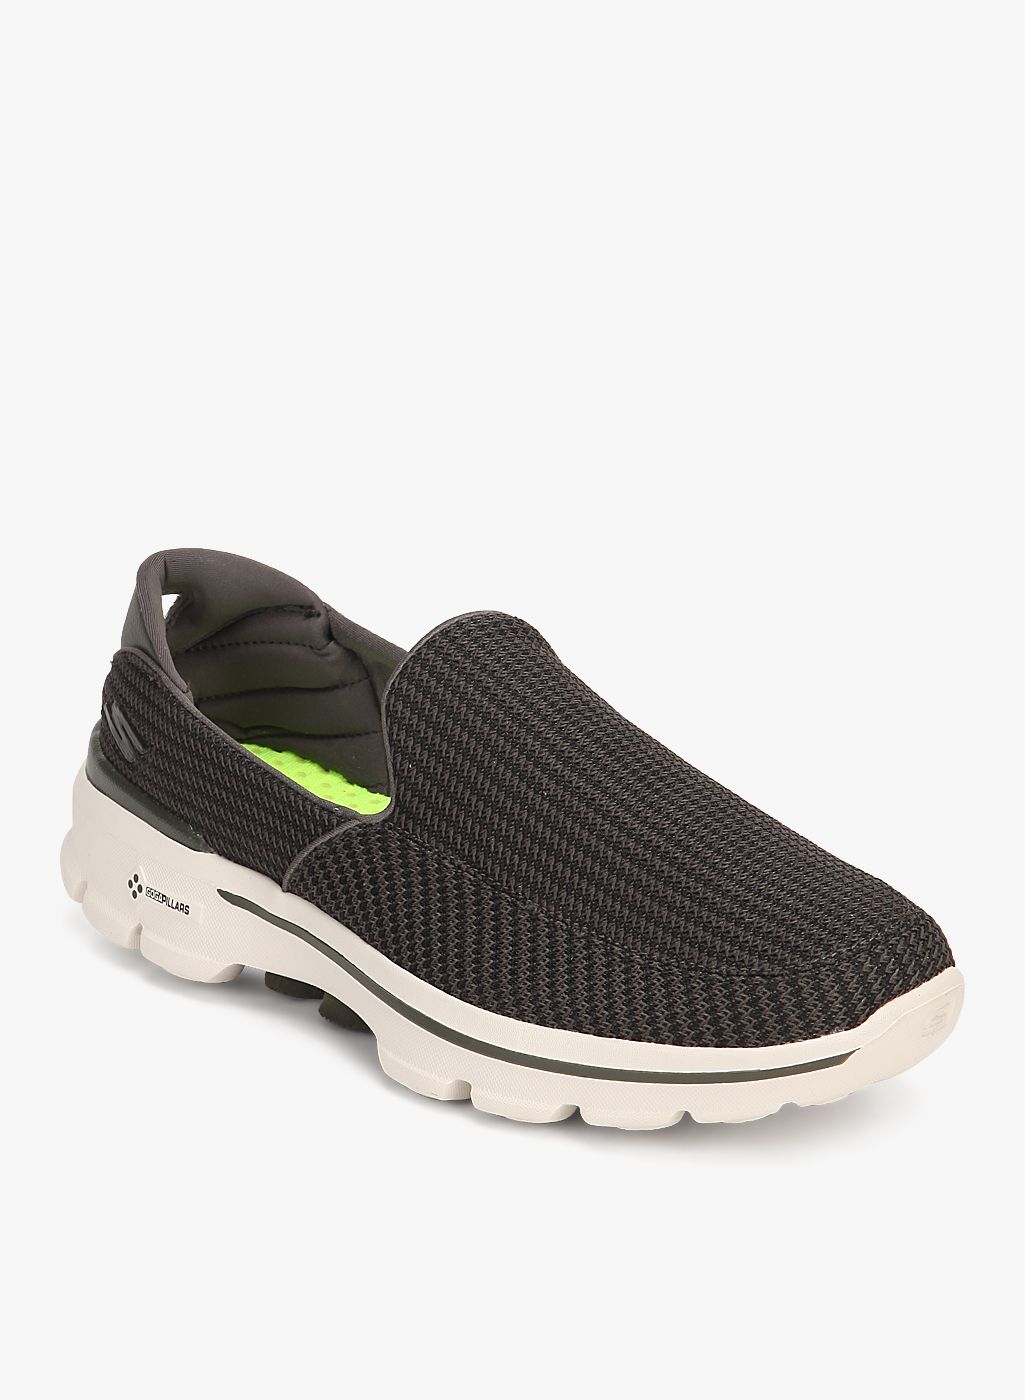 skechers on the go olive